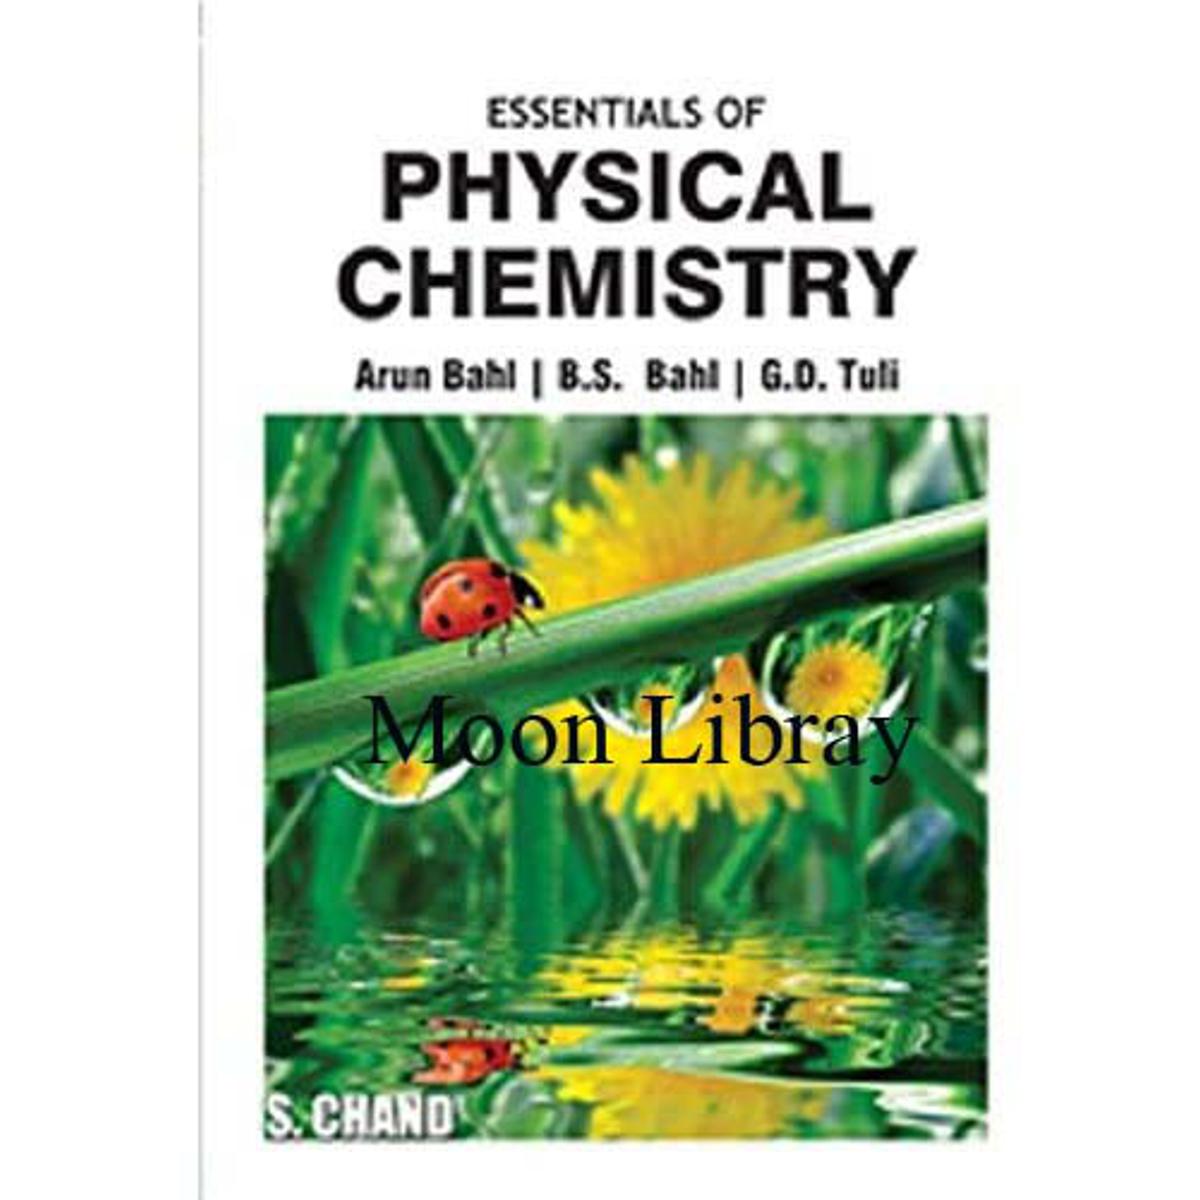 Essential of Physical Chemistryby Arun Bahl, B.S. Bahl, G.D. Tuli